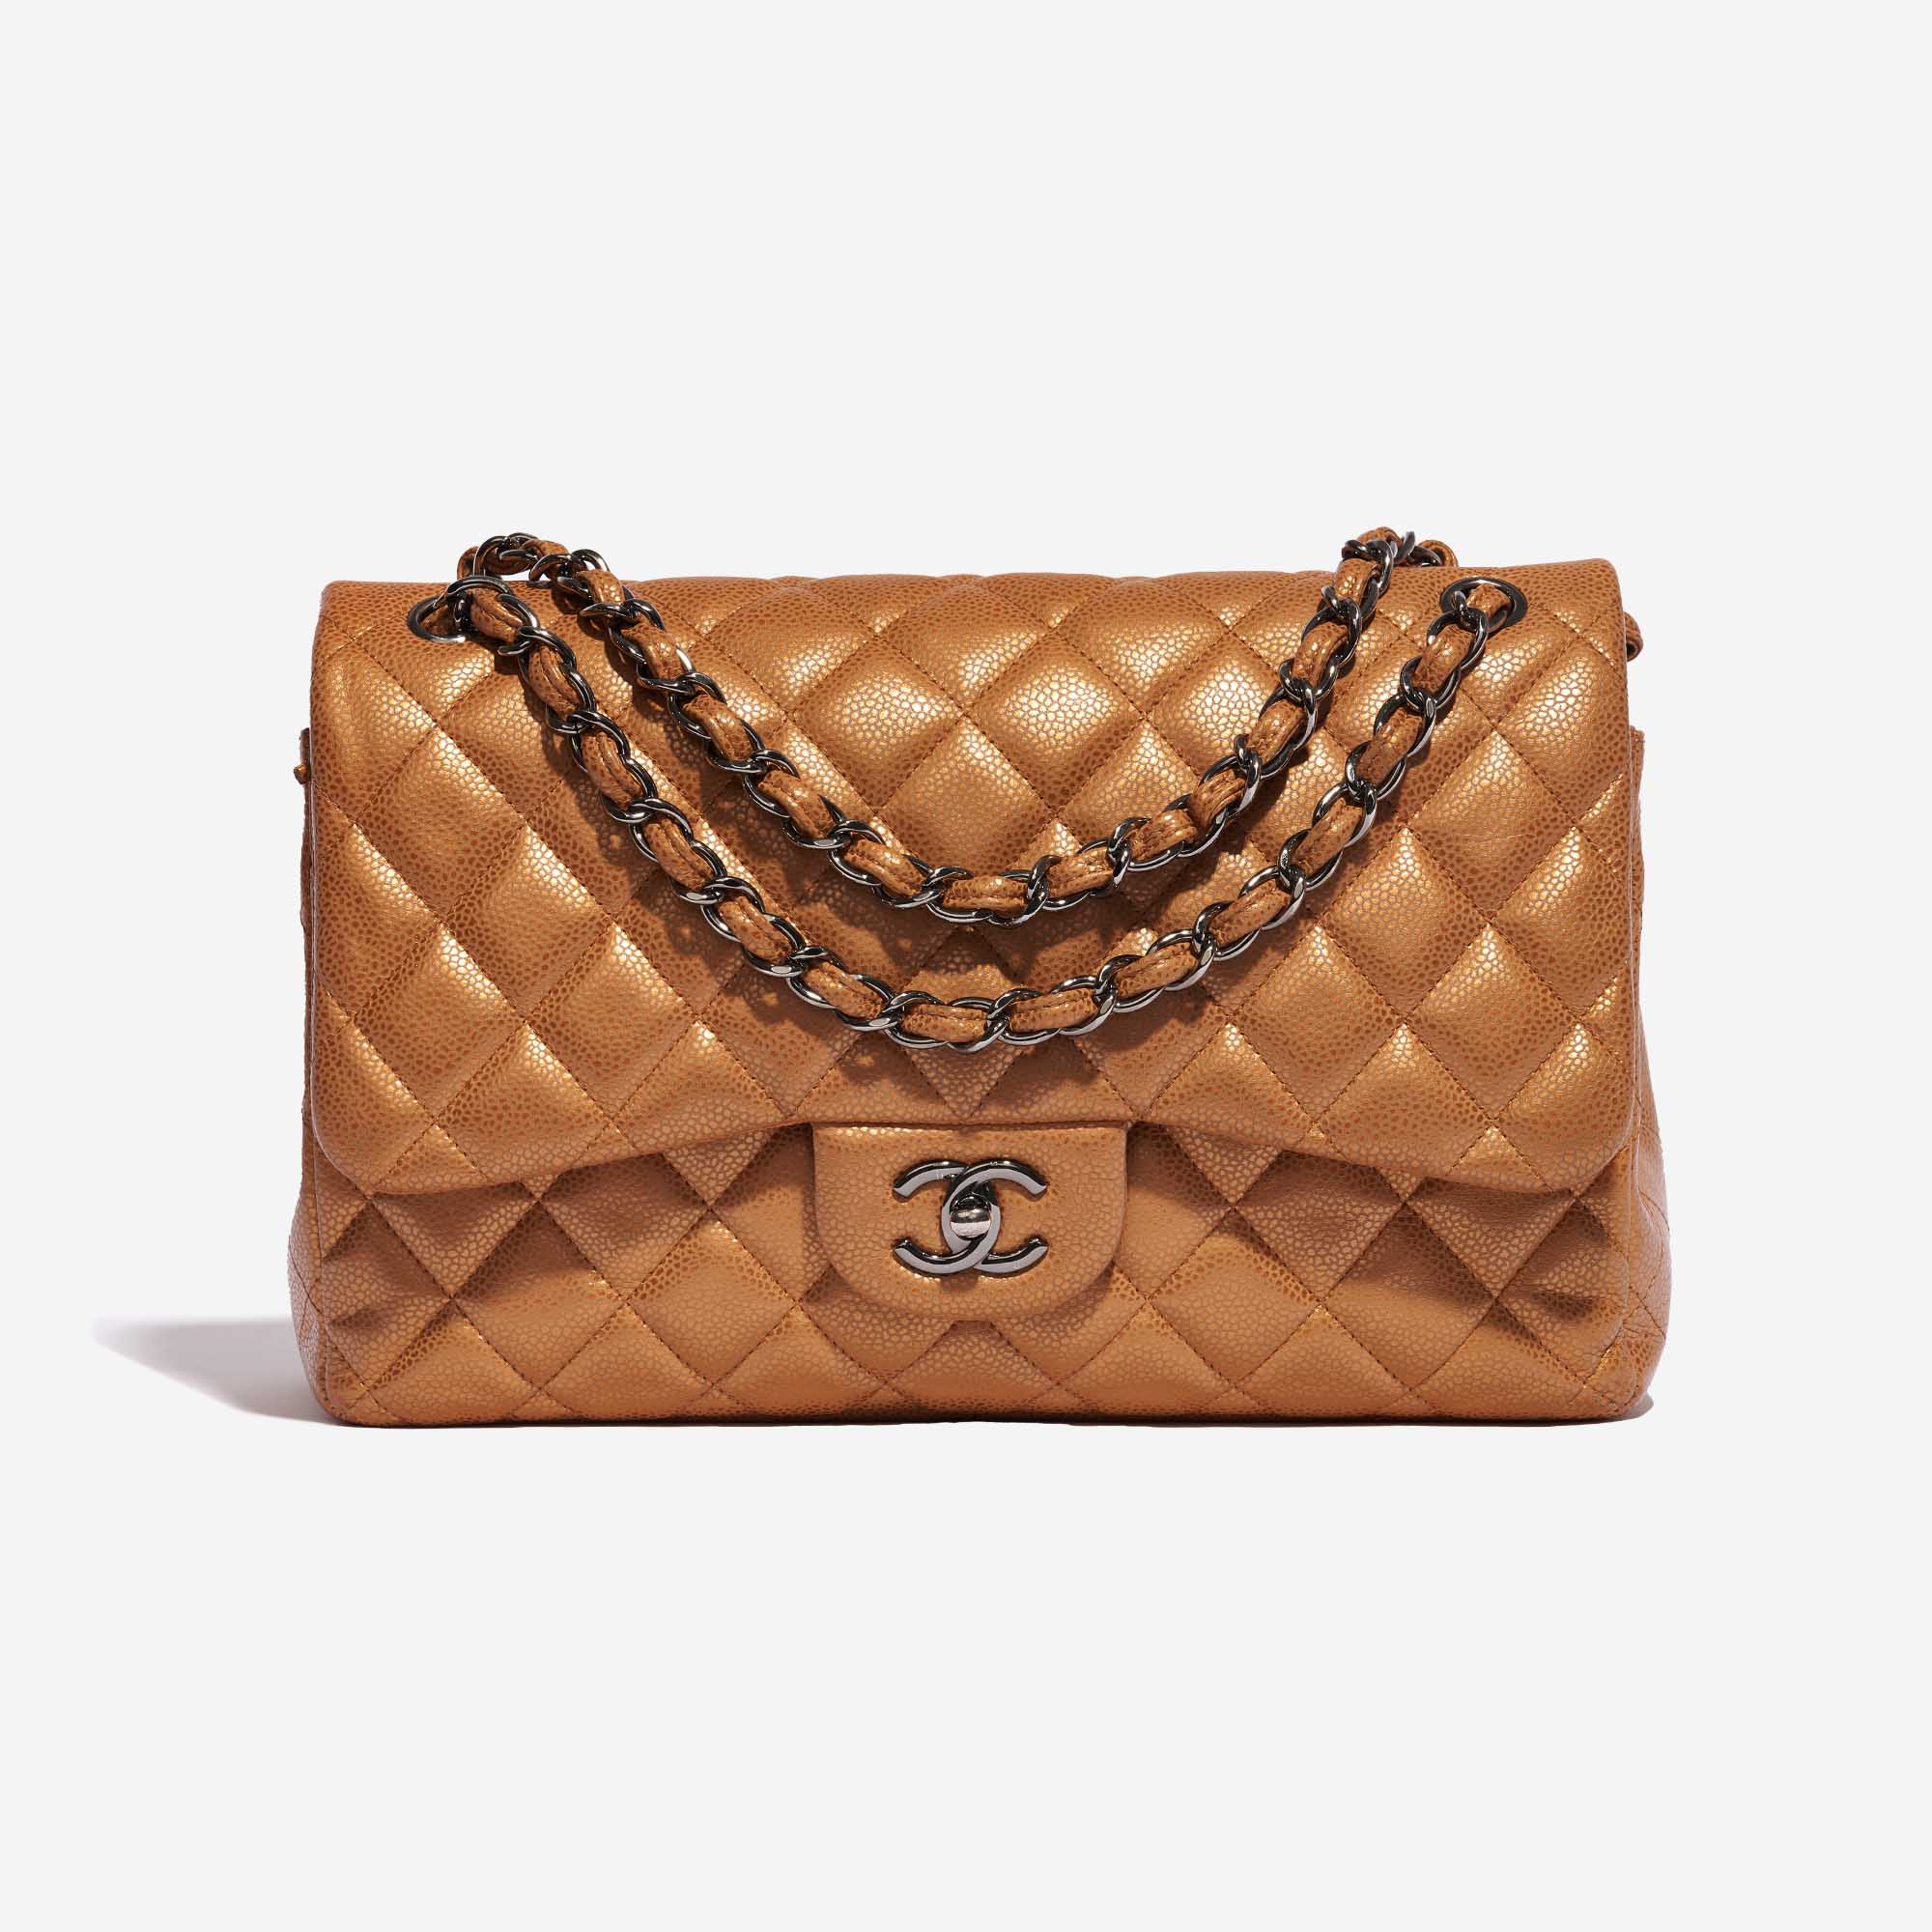 Chanel Pre-owned 2002 Diamond-Quilted CC Shoulder Bag